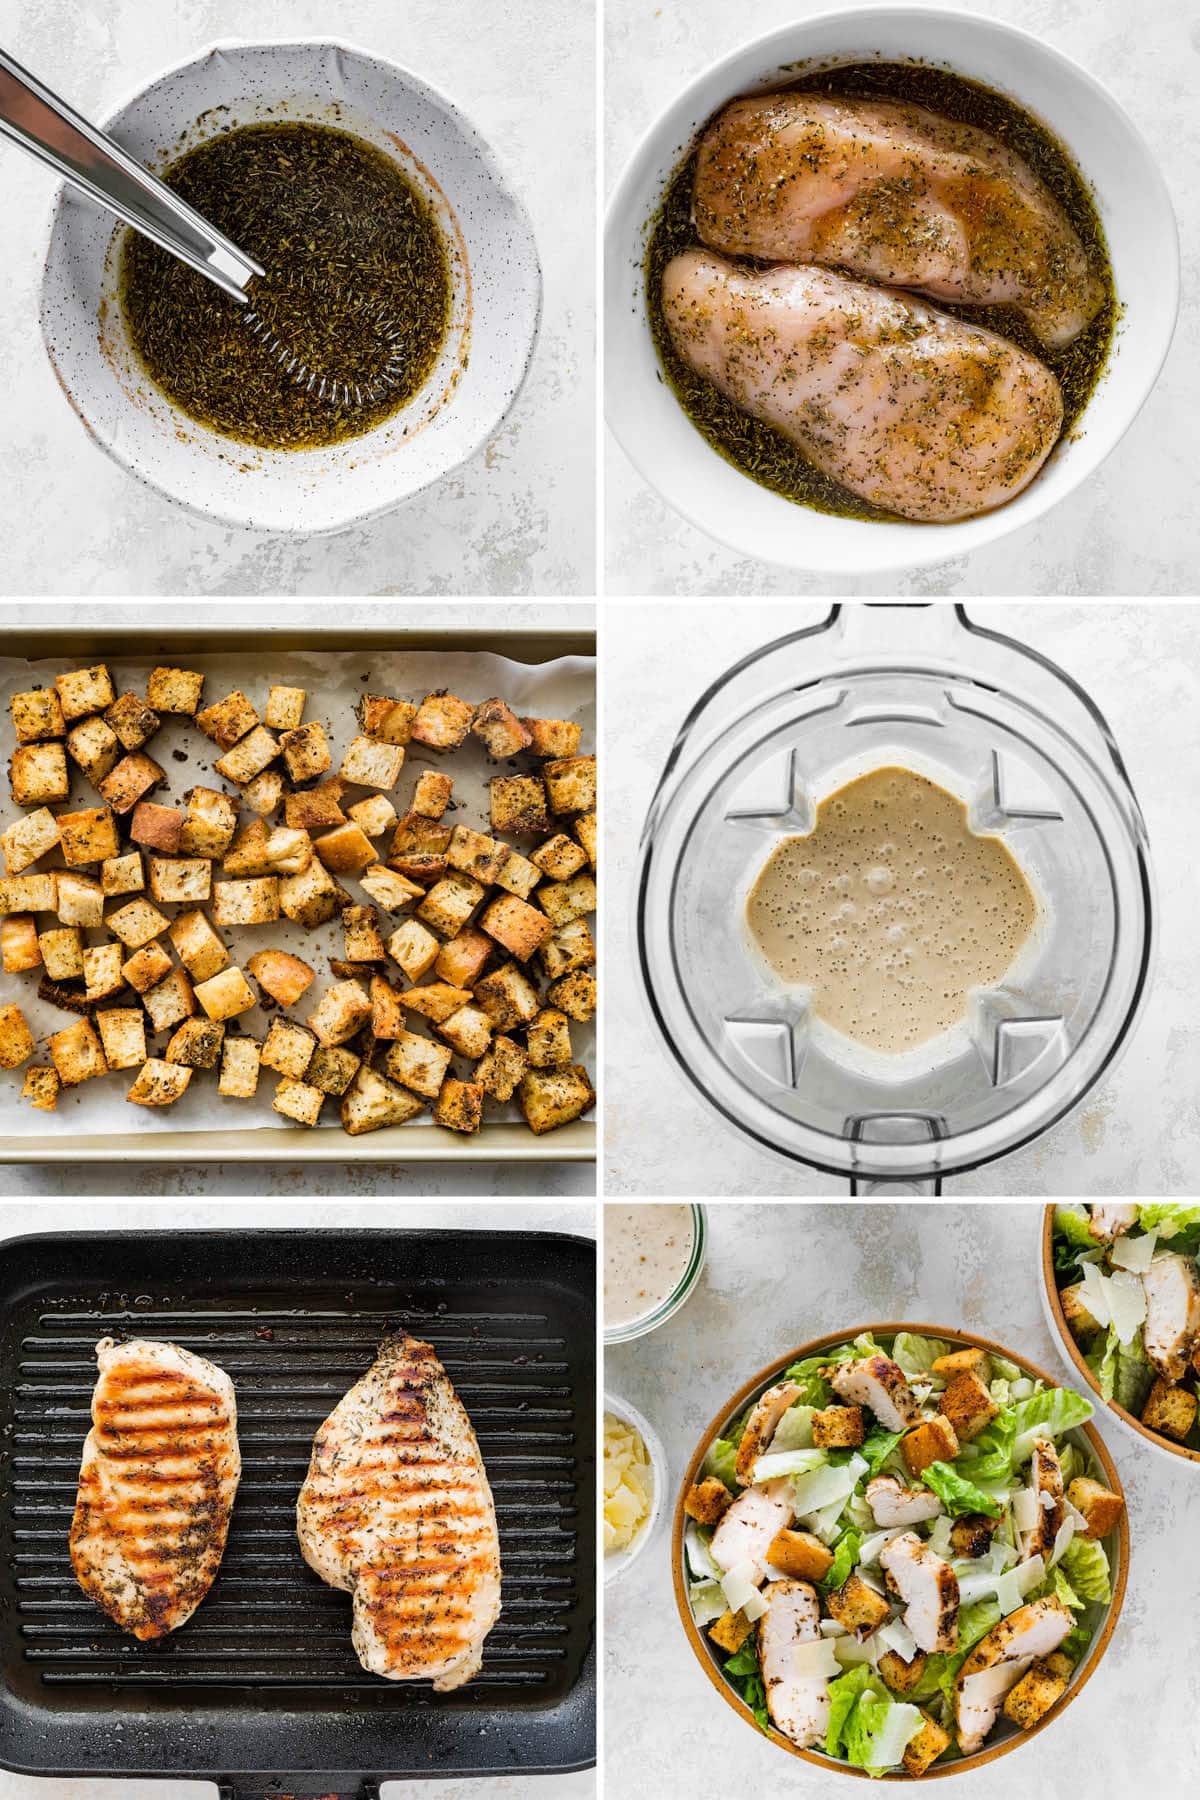 Collage of six photos showing the steps to make Grilled Chicken Caesar Salad: marinating the chicken, baking sourdough croutons, blending homemade caesar dressing, grilling the chicken and then assembling the salad.